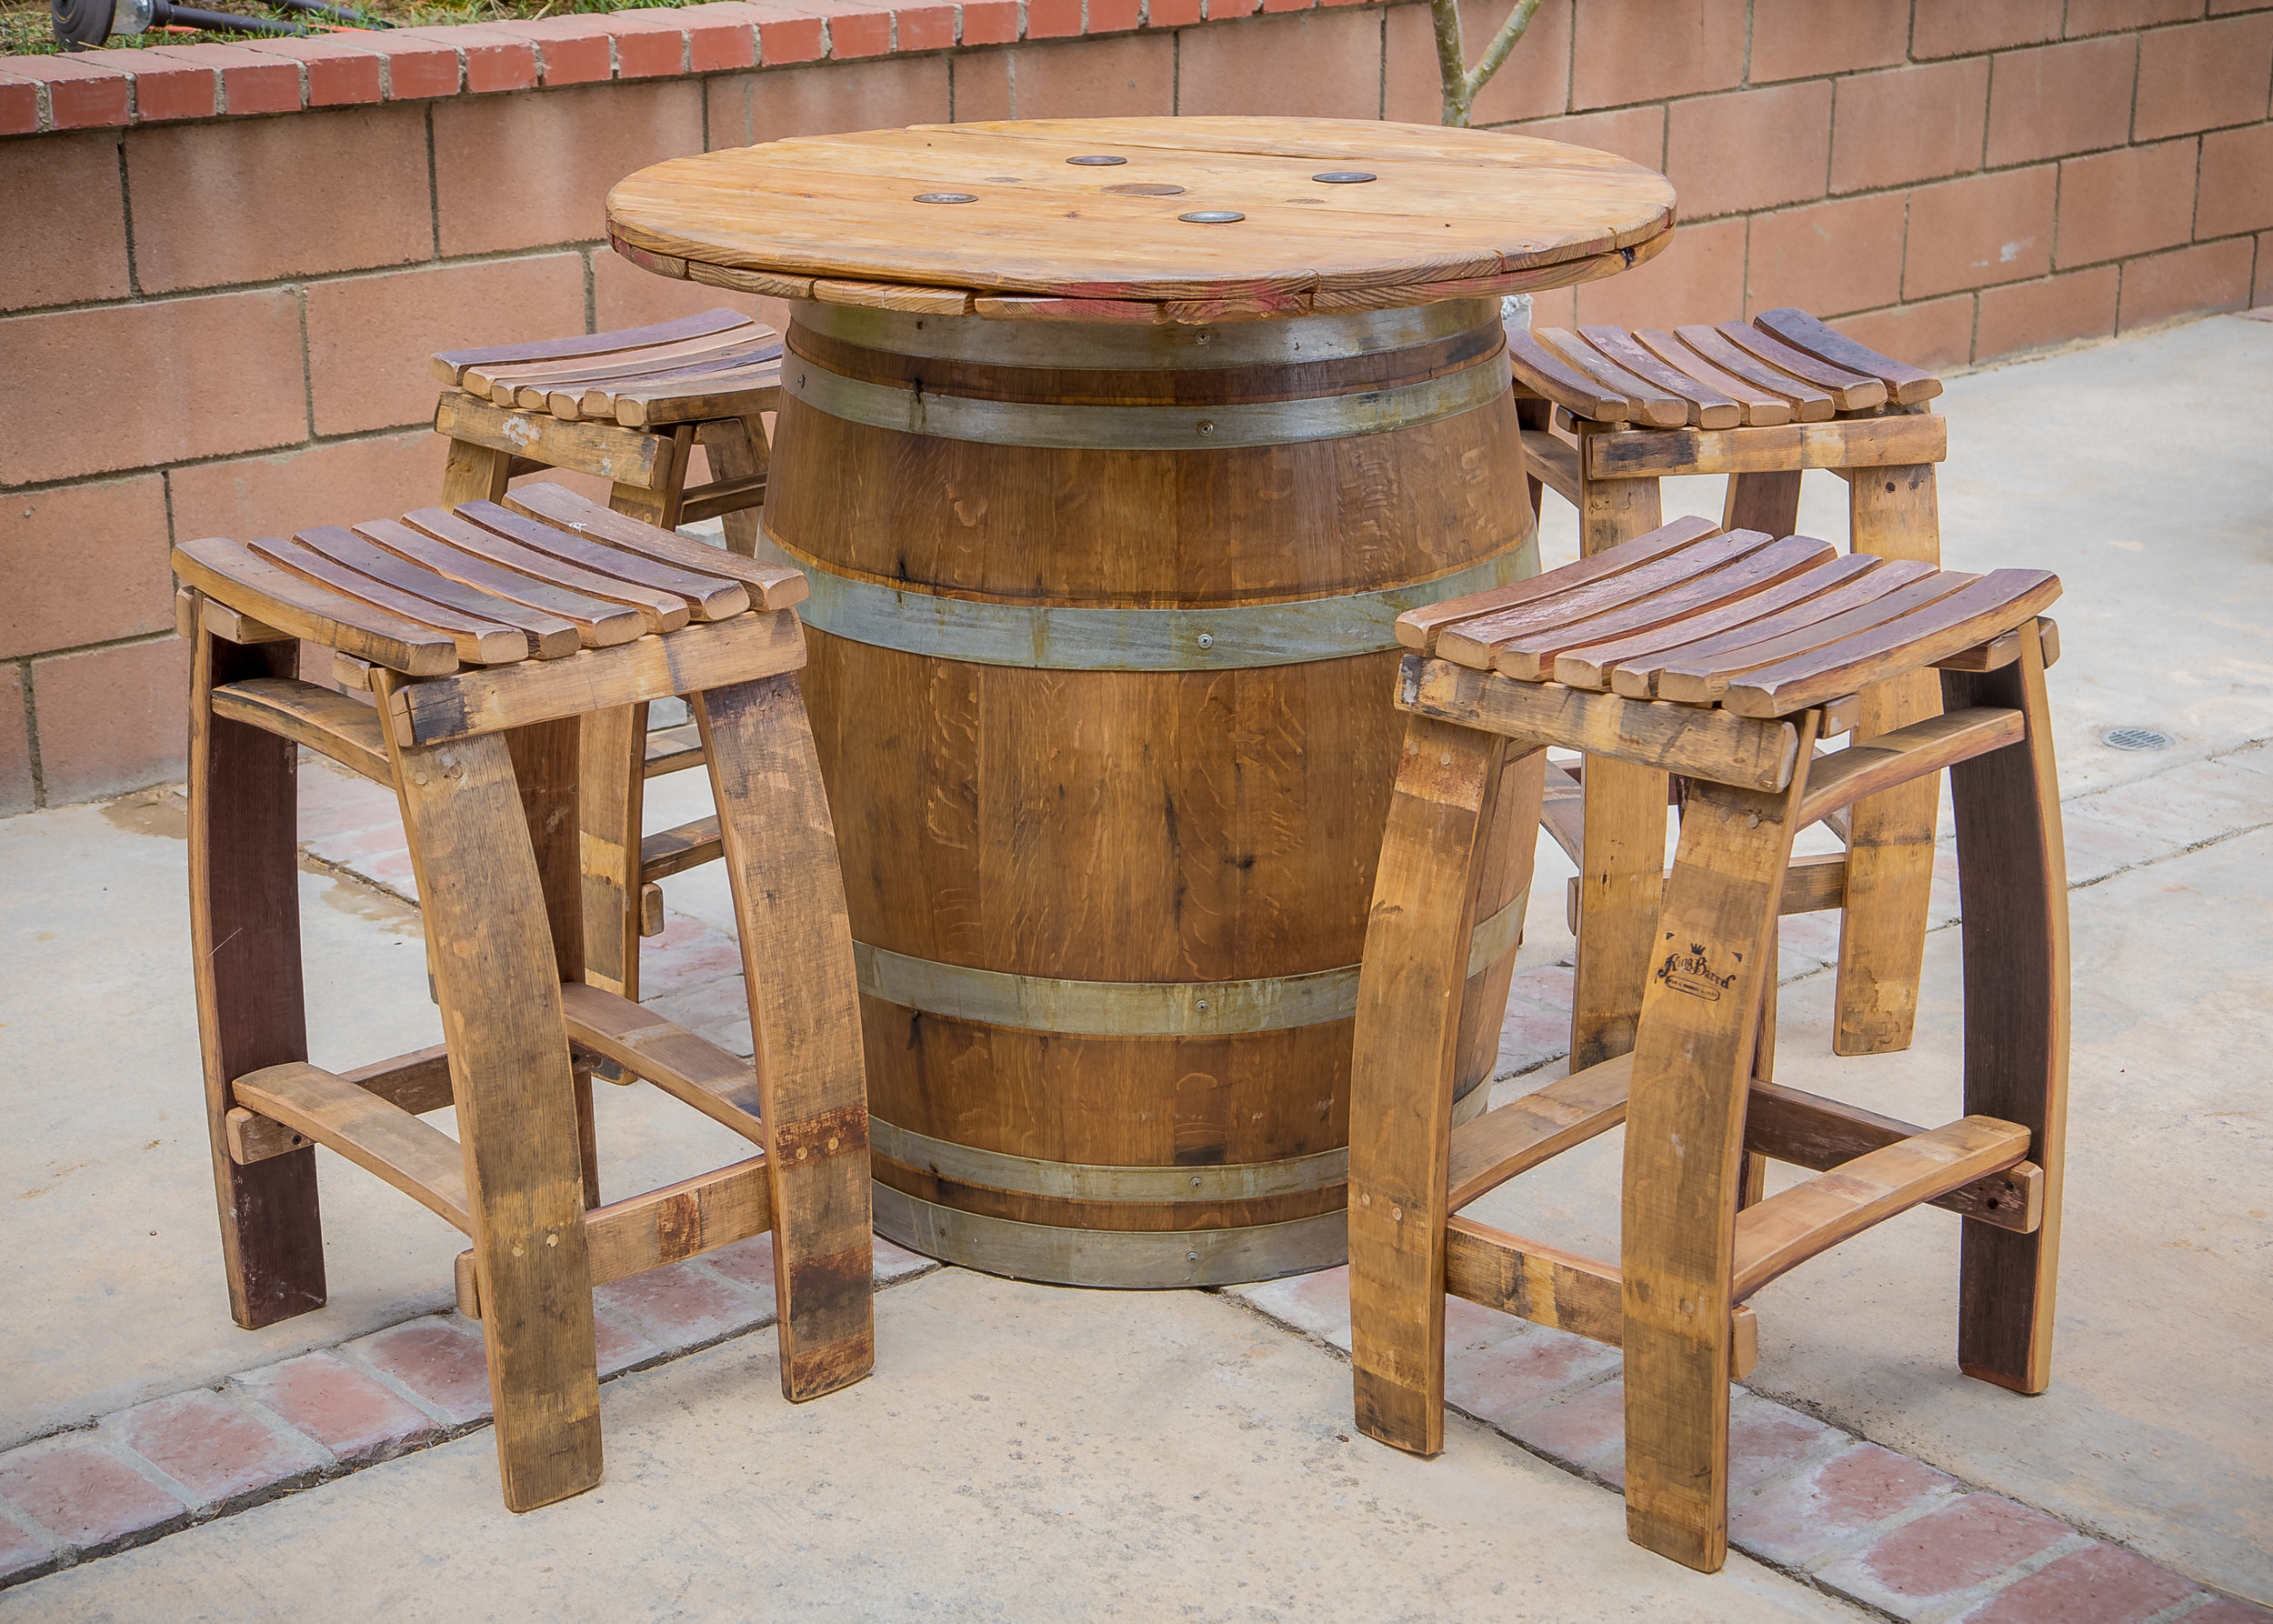 Hoedown Bar Table King Barrel - How To Attach A Table Top Whiskey Barrel